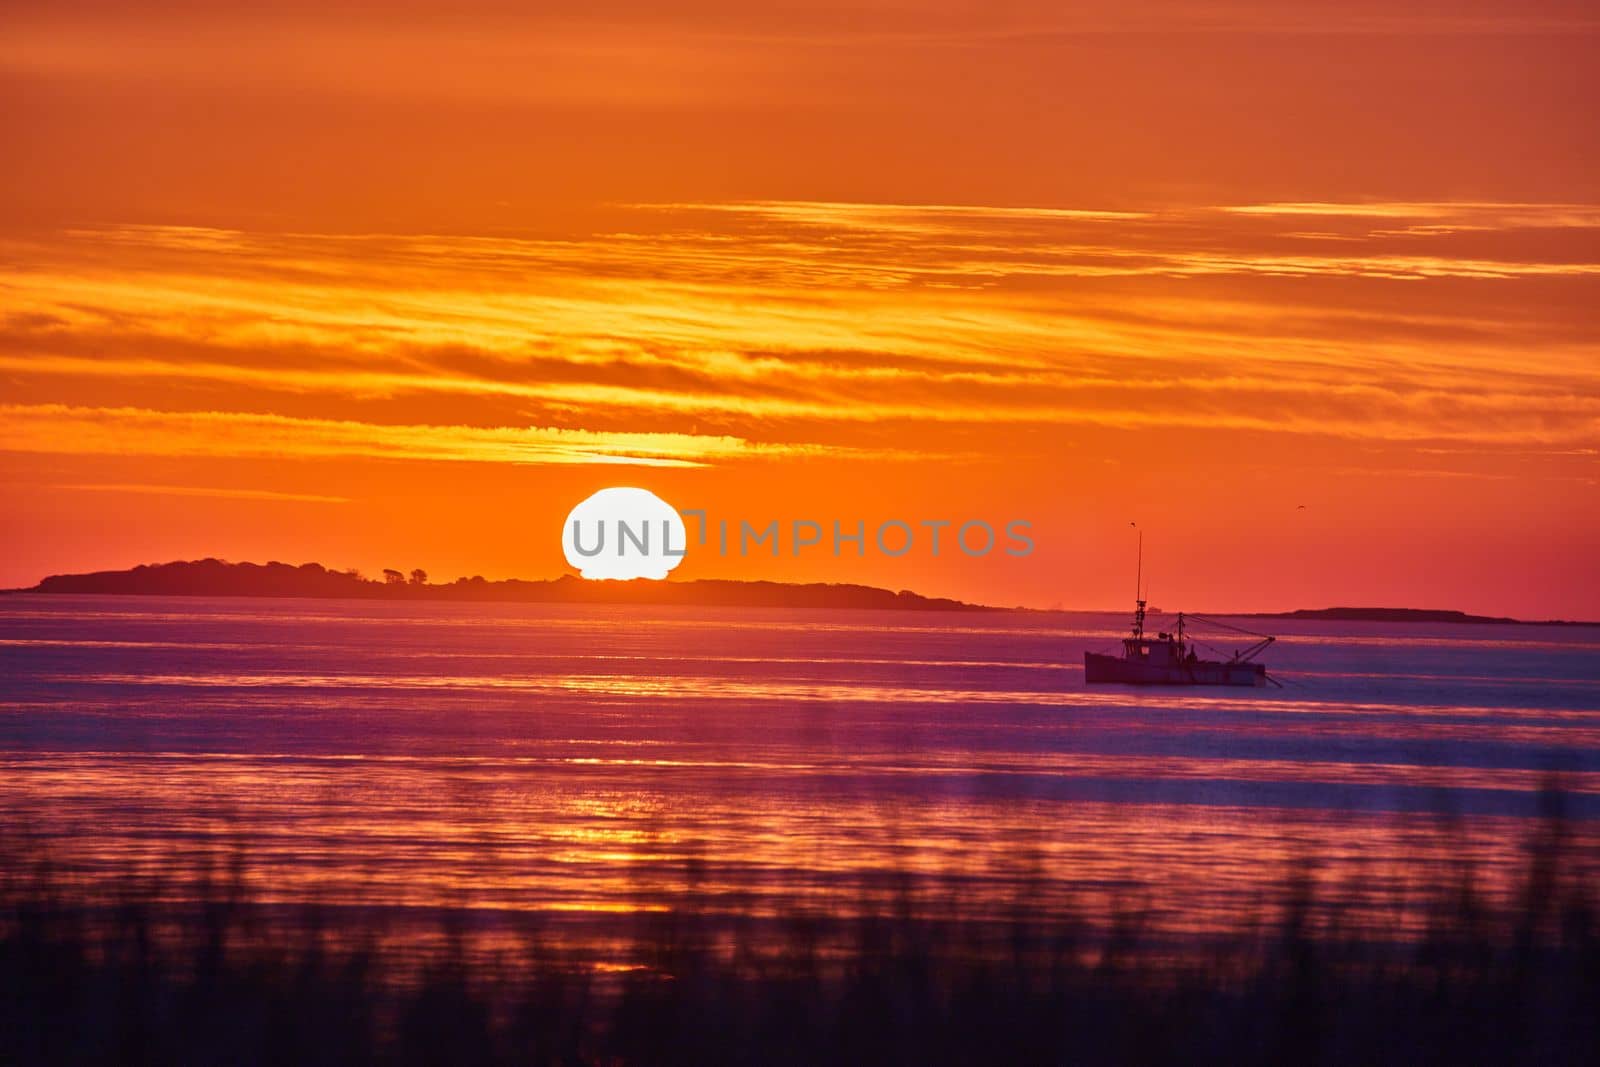 Image of Sunrise with golden light on ocean east coast with grassy coast in foreground and fishing ship in distance